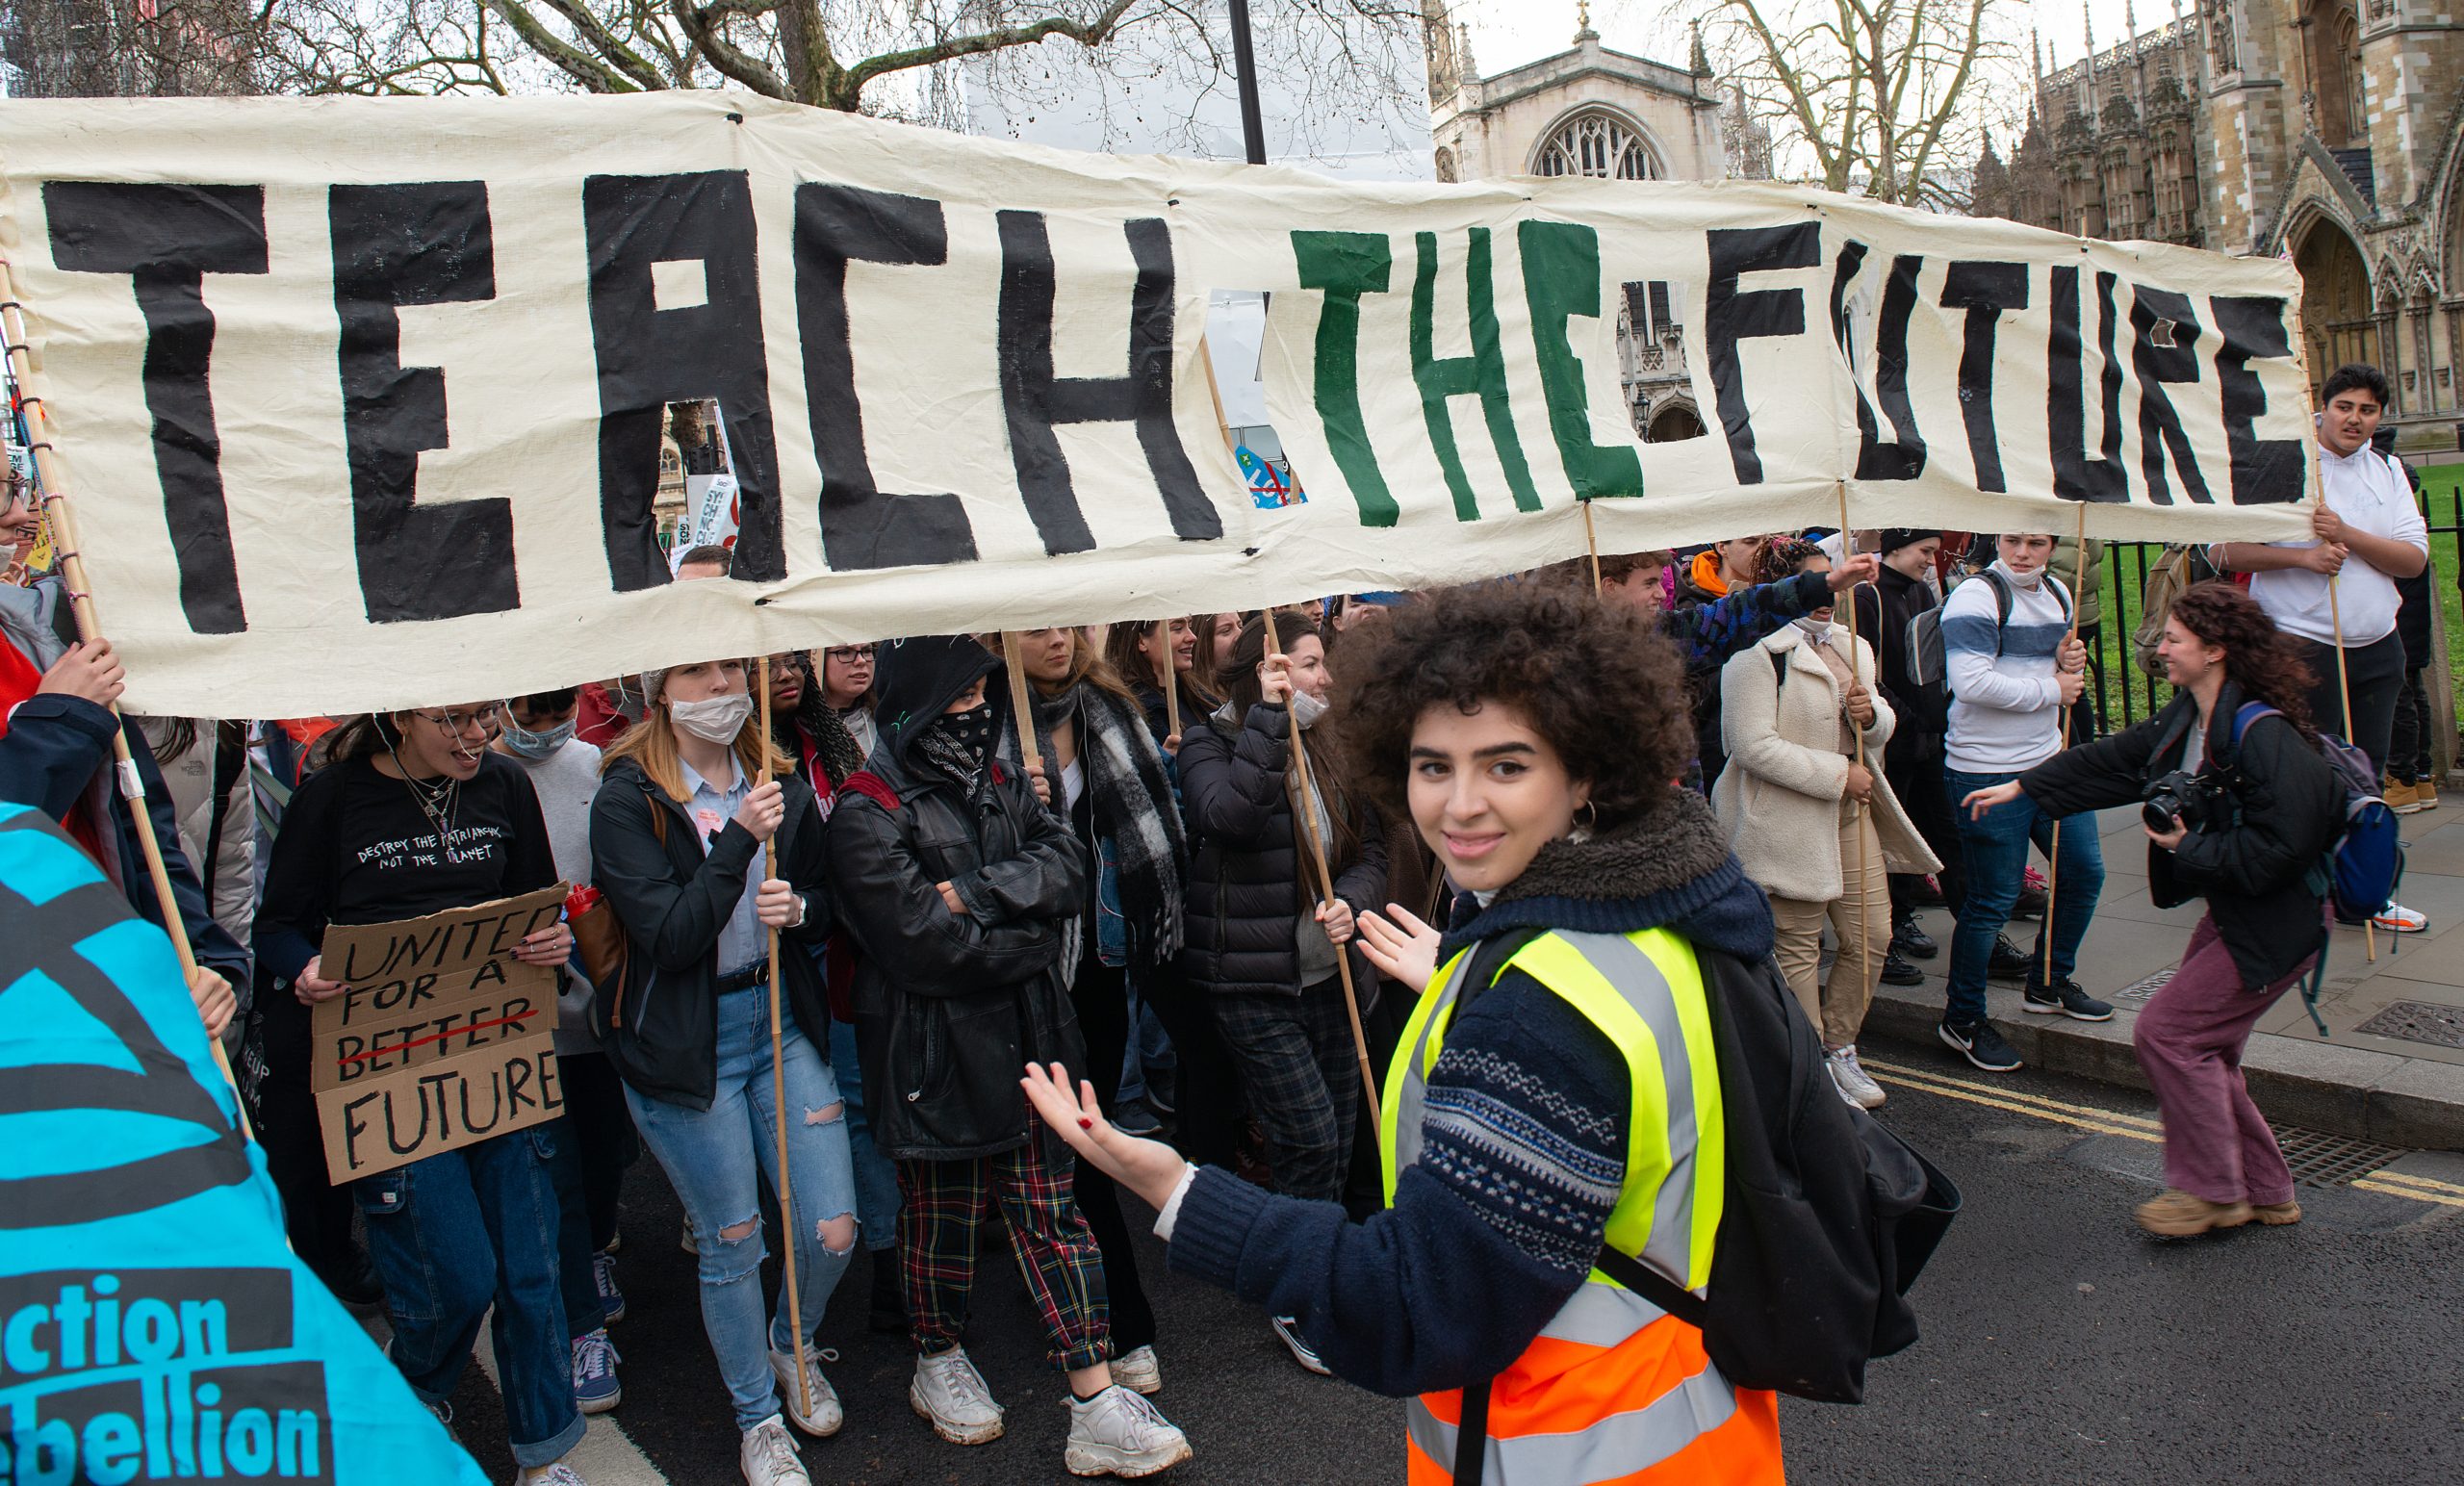 Two youthful organisers, one wearing a reflective vest, stand in front of a wall of people standing in the street and on the sidewalk as they hold an unfurled banner on which is written "Teach The Future"